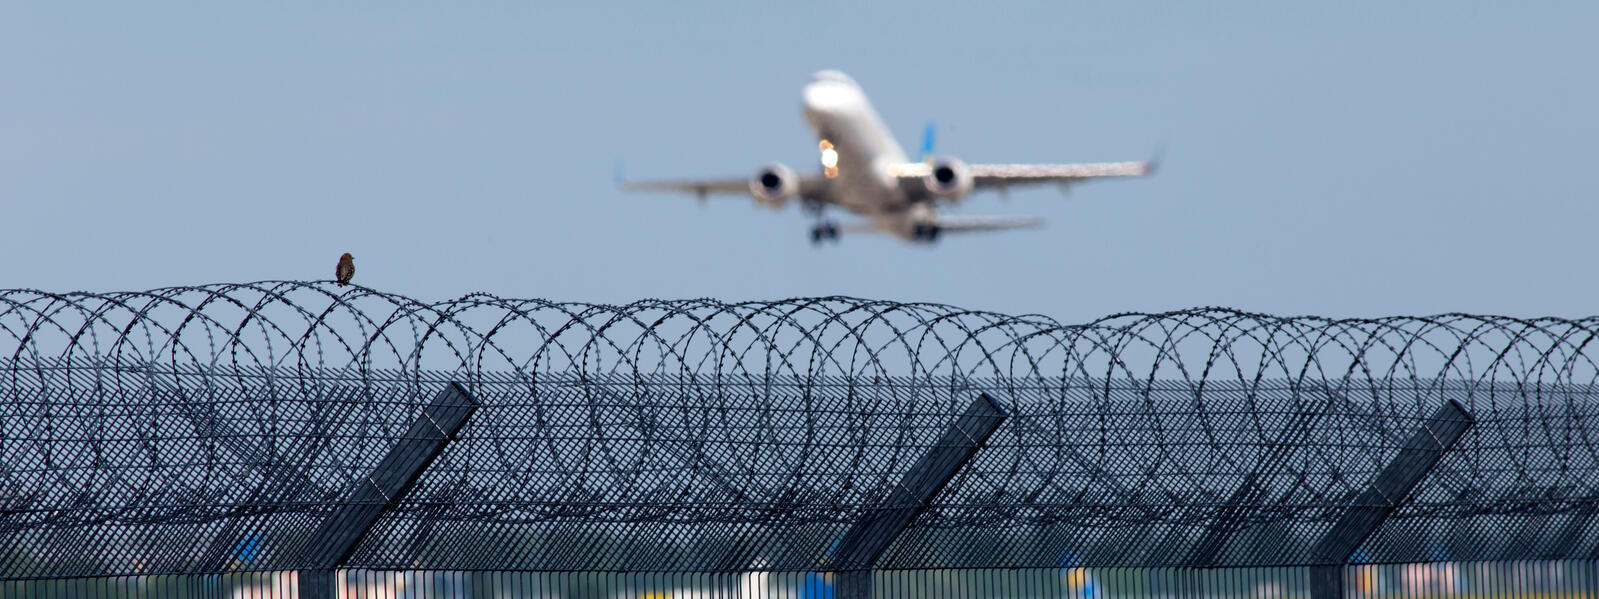 Perimeter security fence at a commercial airport